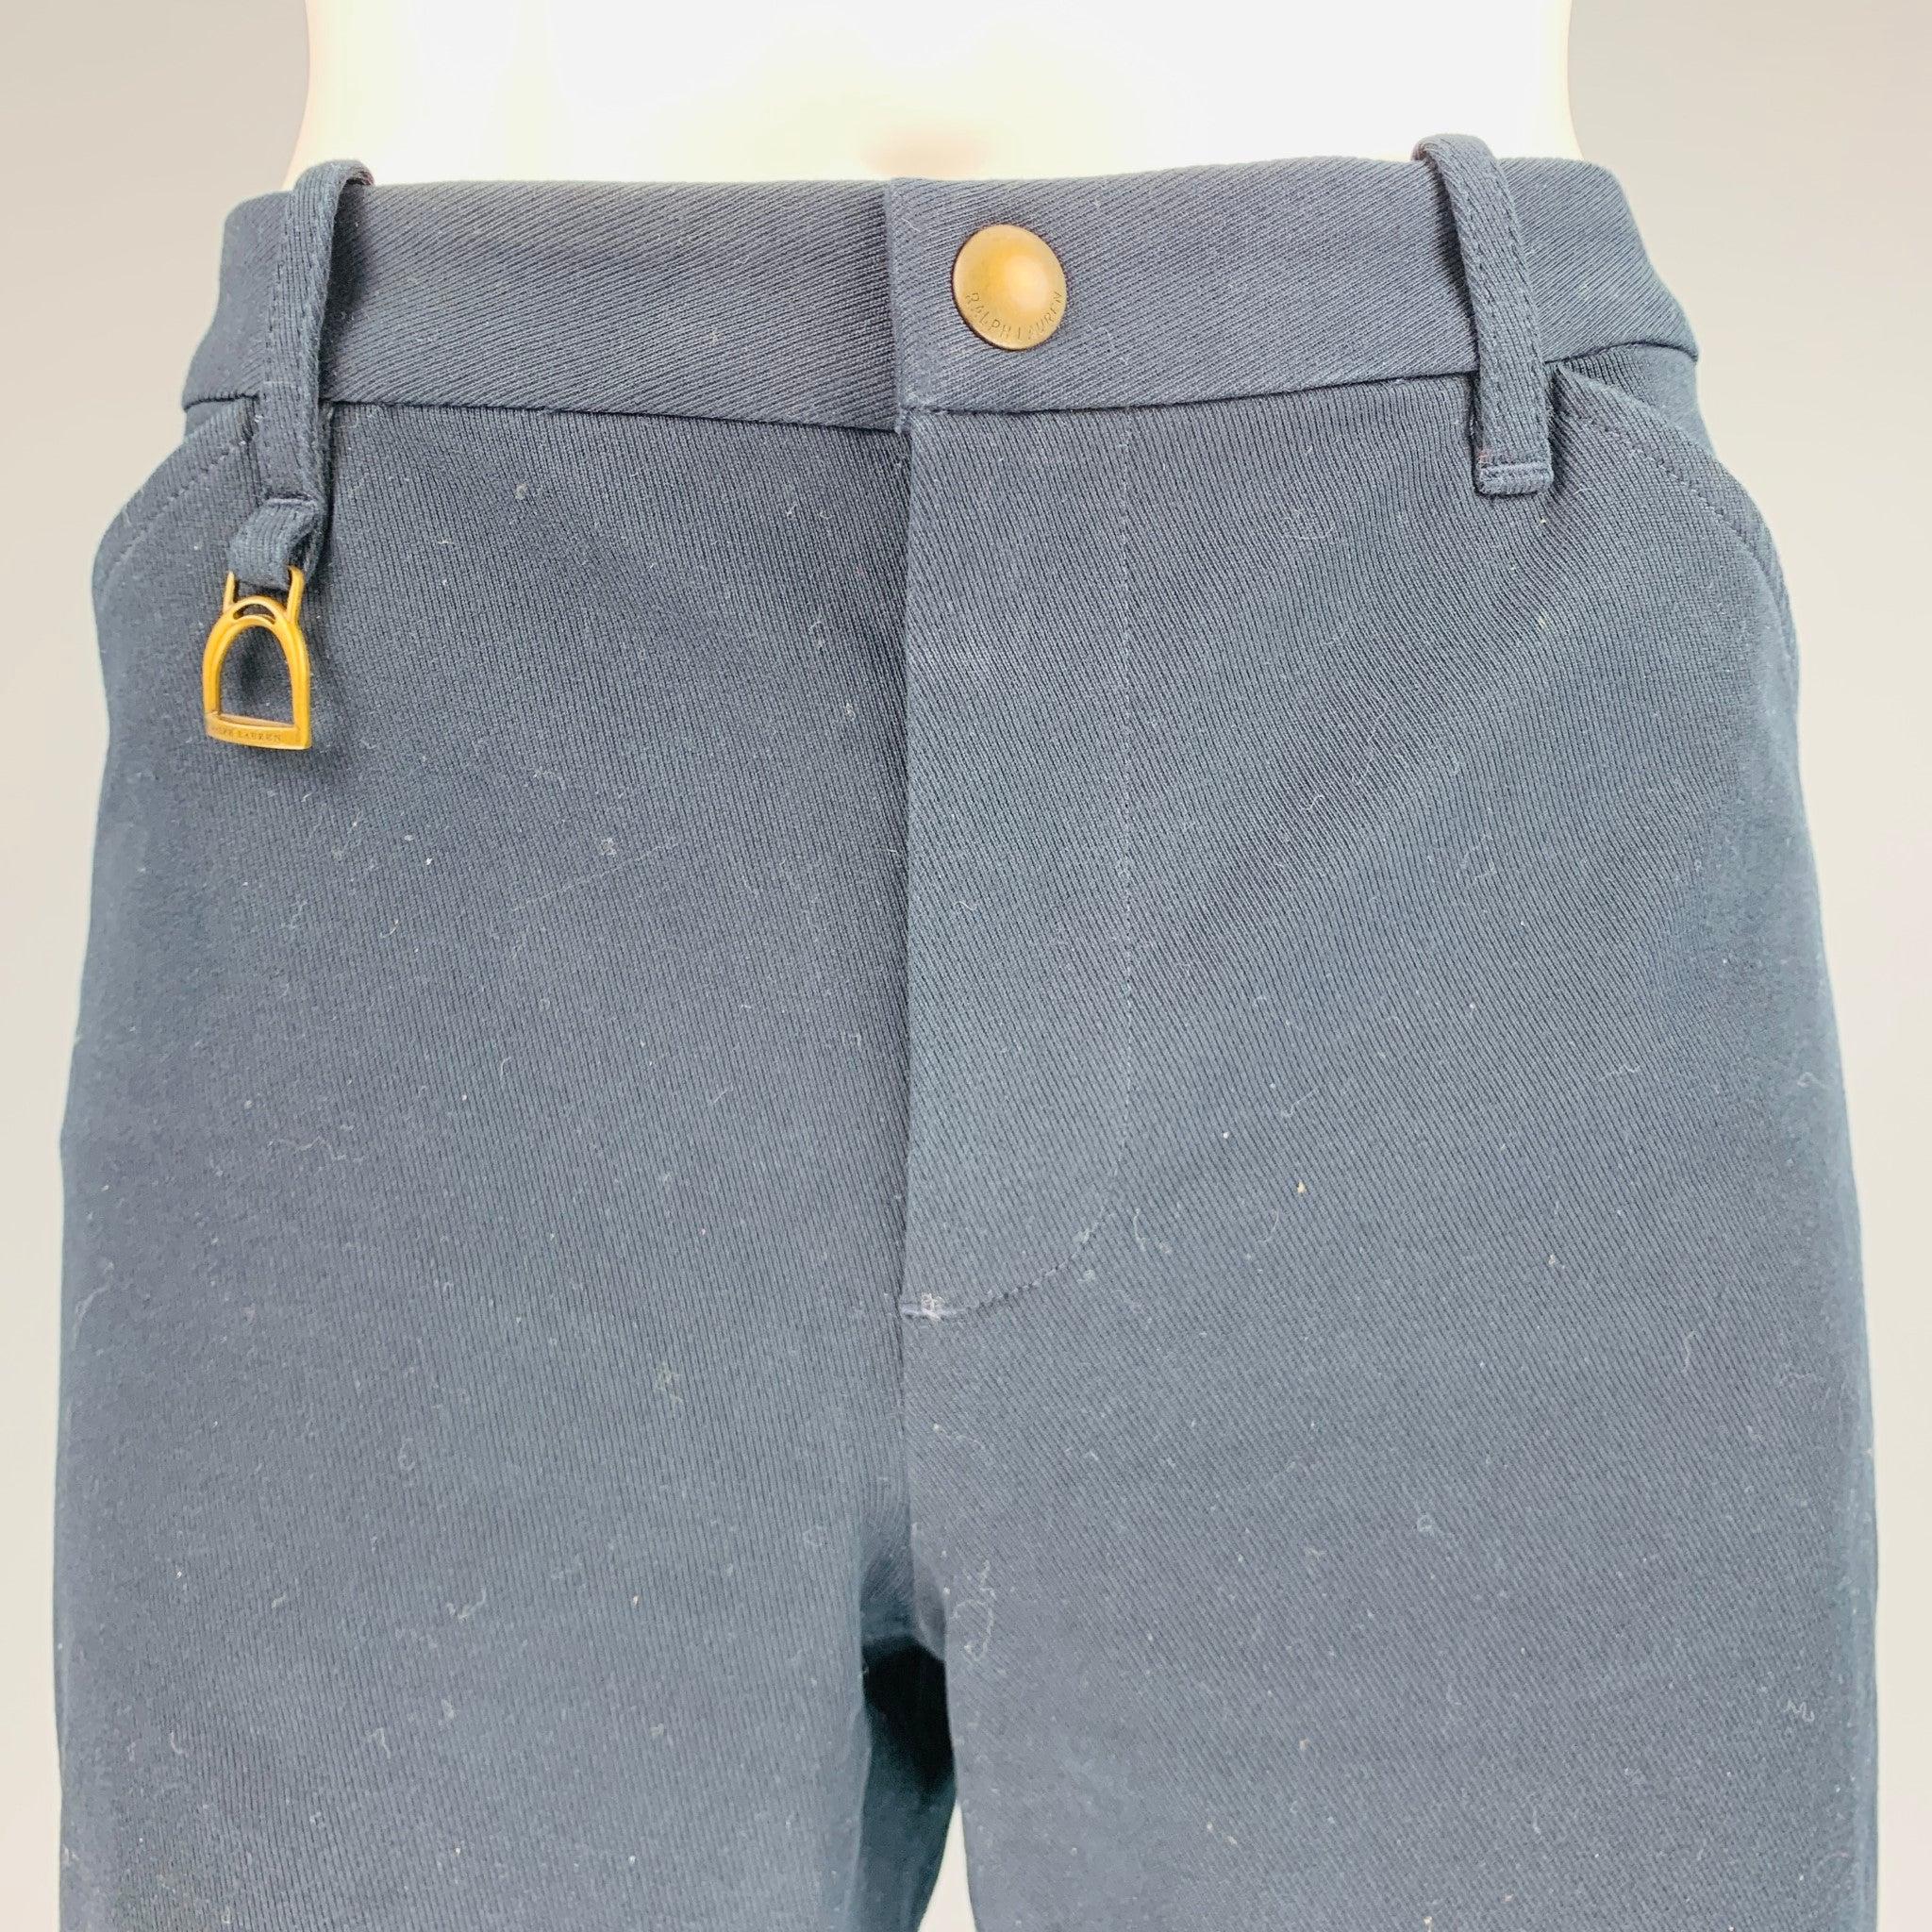 RALPH LAUREN BLUE LABEL casual pants comes in a navy cotton and elastane twill featuring a navy suede patch details, slim fit, low rise, and a zip fly closure. Made in USA.Excellent Pre-Owned Condition. 

Marked:   8 

Measurements: 
  Waist: 32